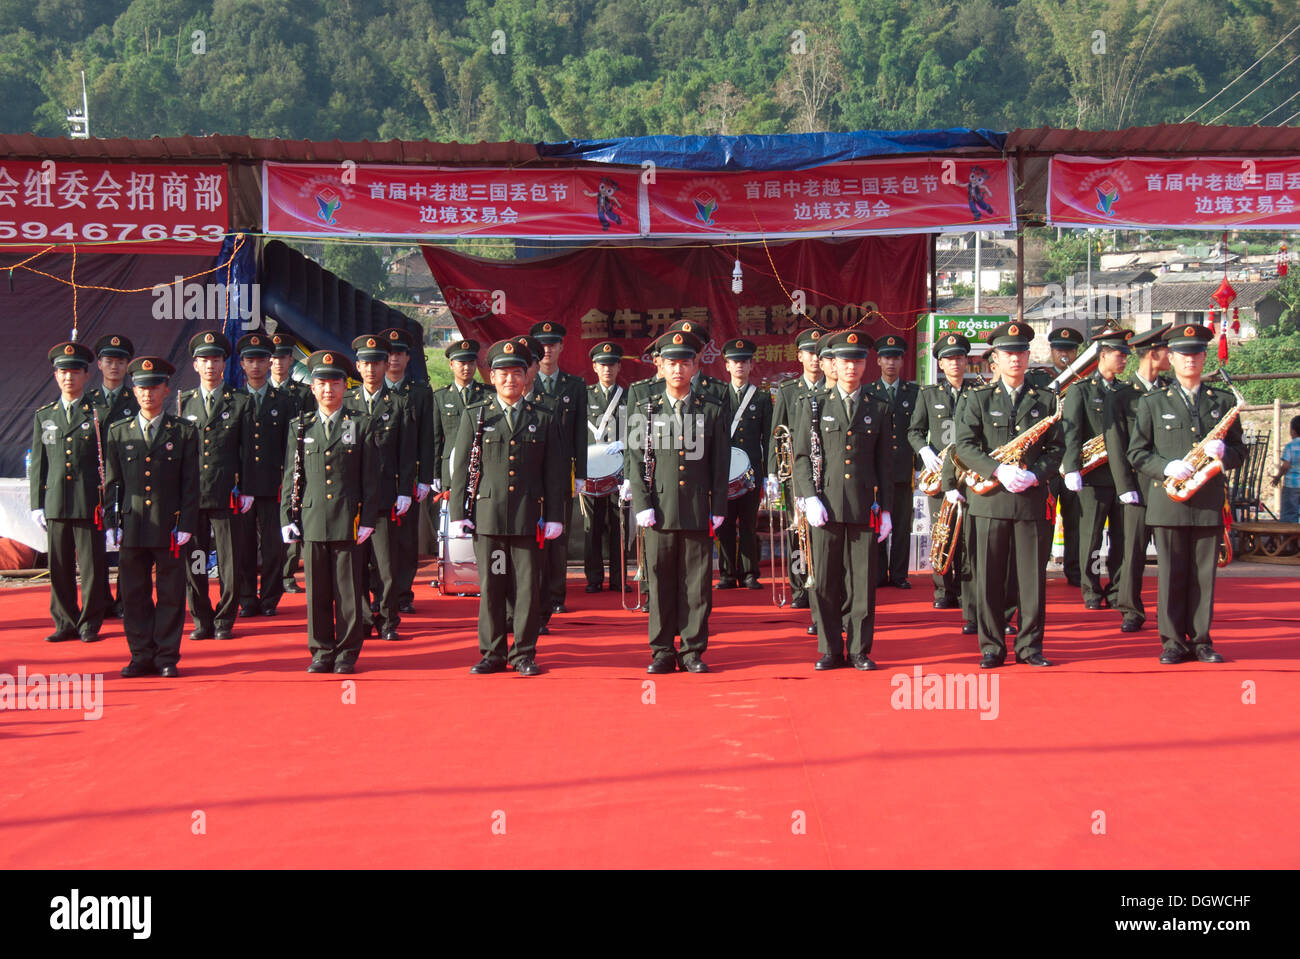 Military Band of the Army, Festival in Jiangcheng, Pu'er City, Yunnan Province, People's Republic of China, Southeast Asia, Asia Stock Photo